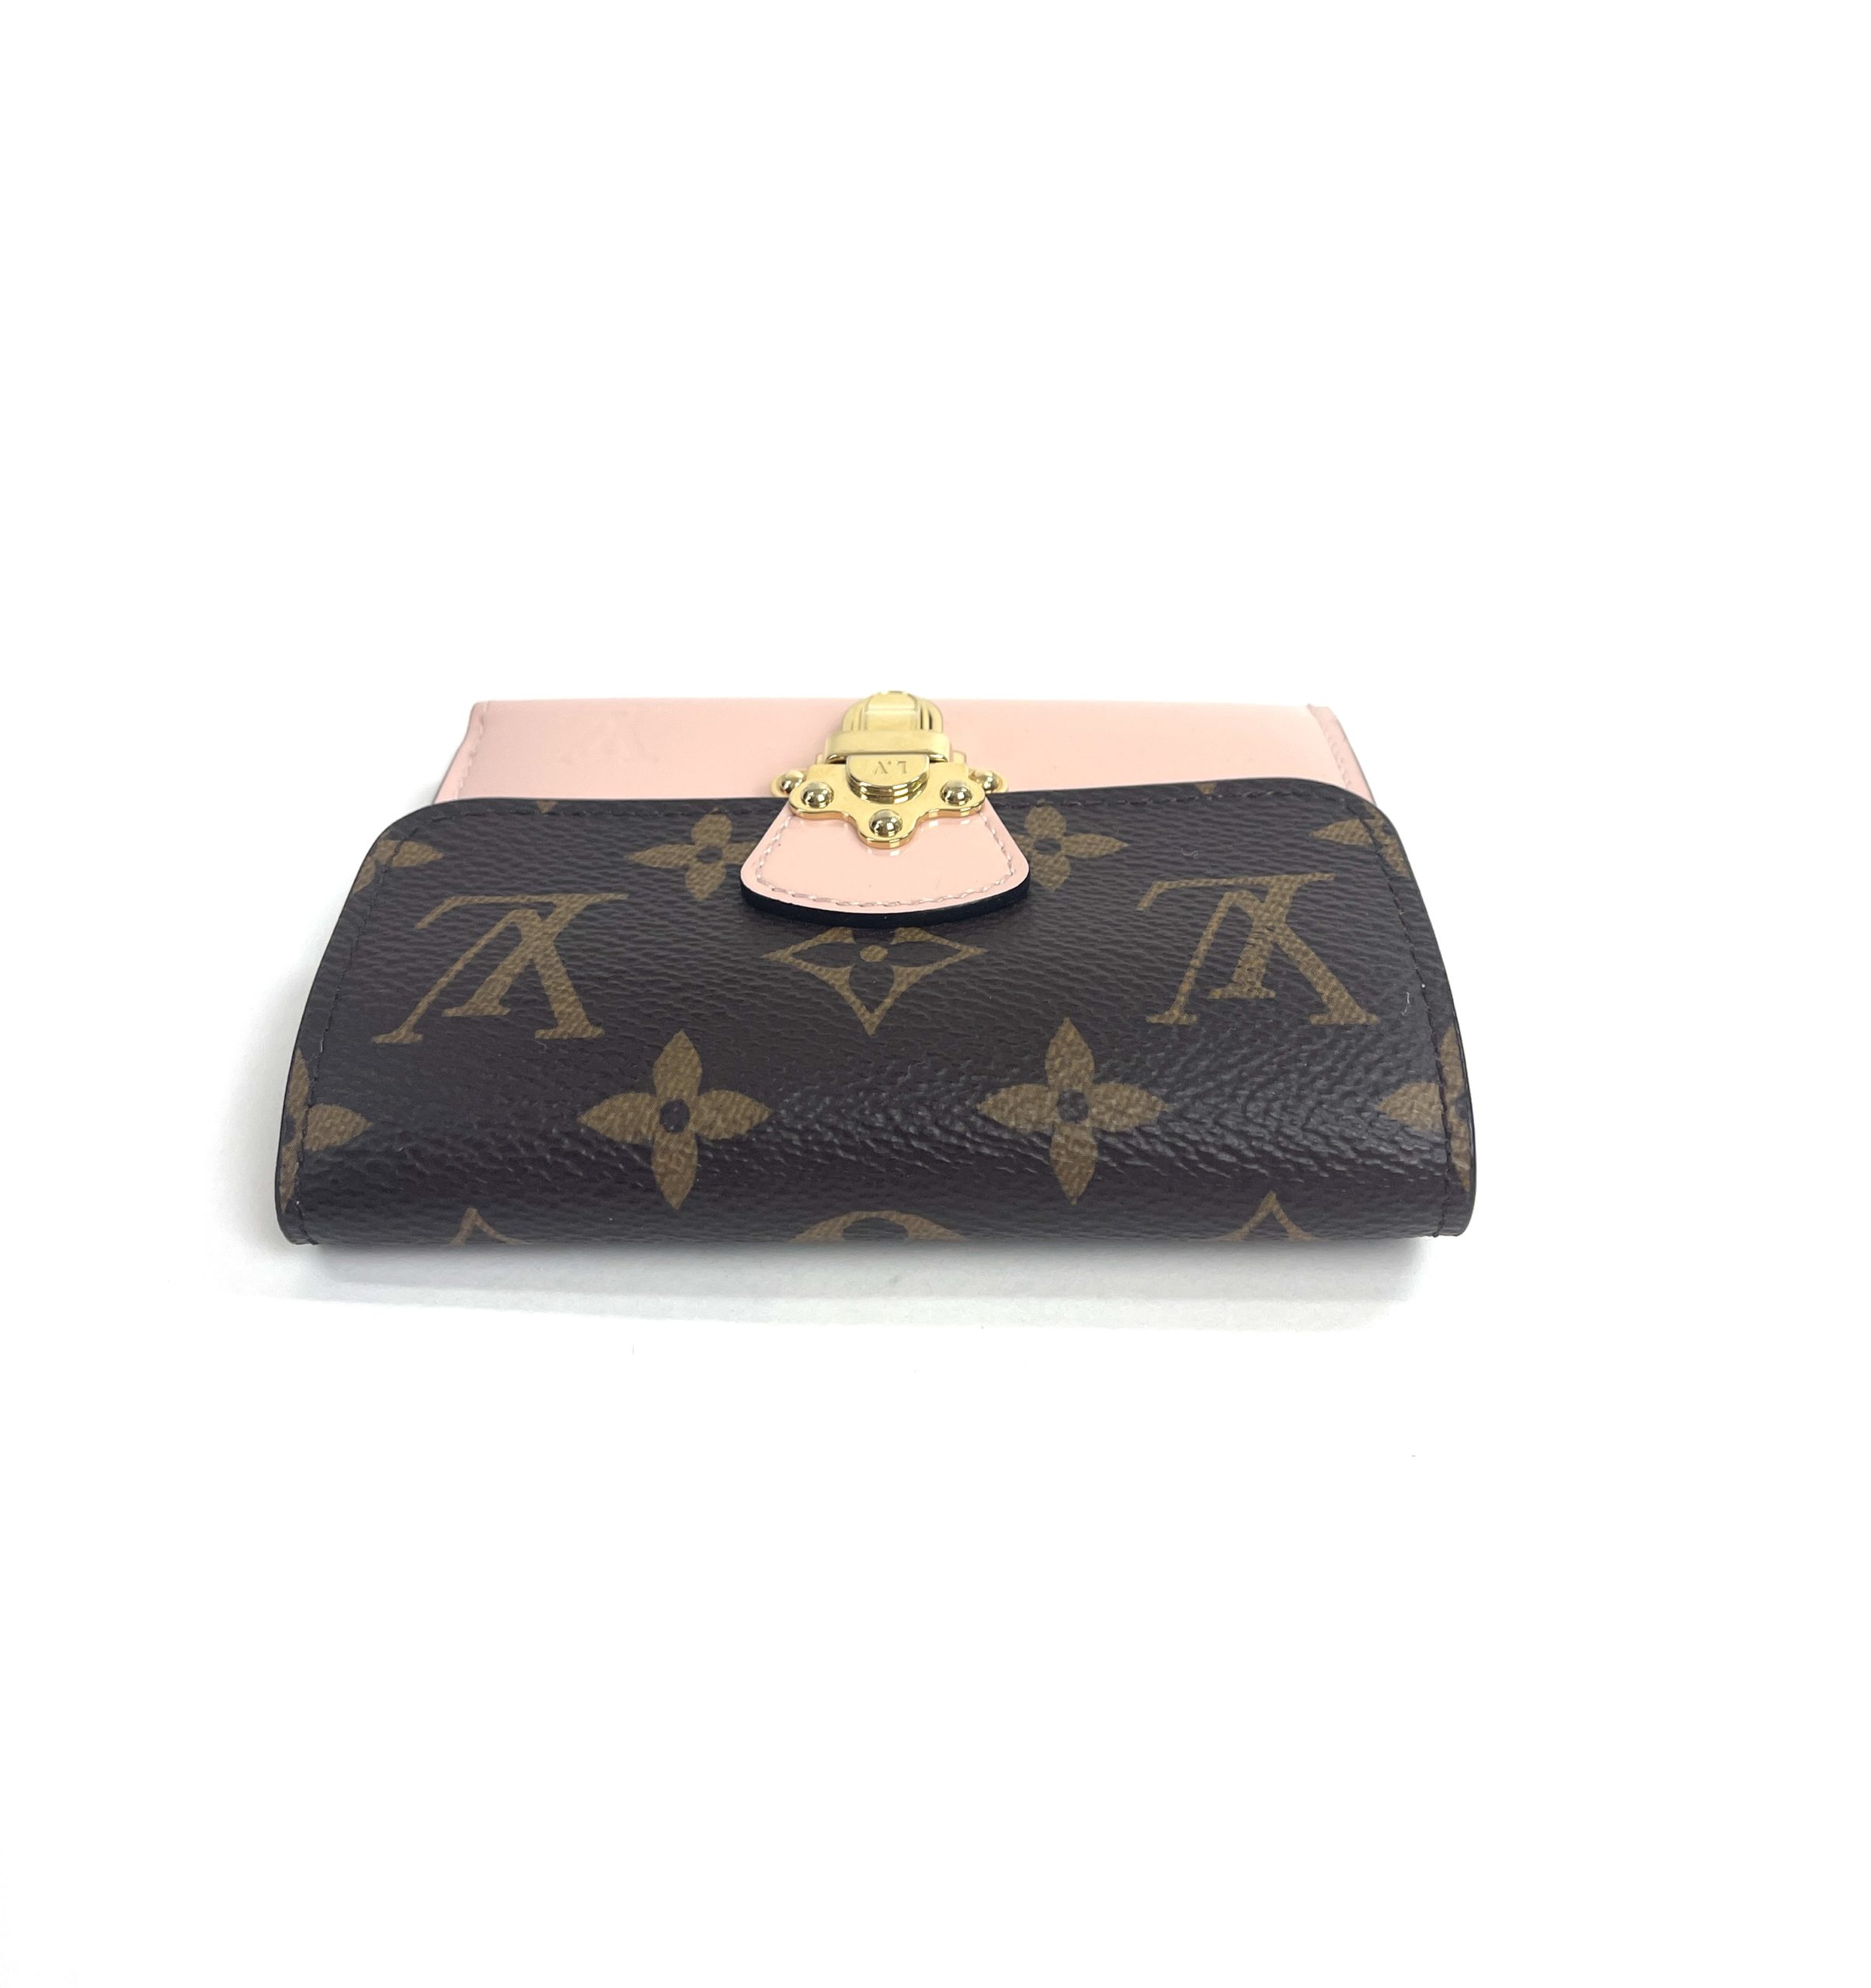 Louis Vuitton Monogram Compact Cherrywood Wallet with Rose